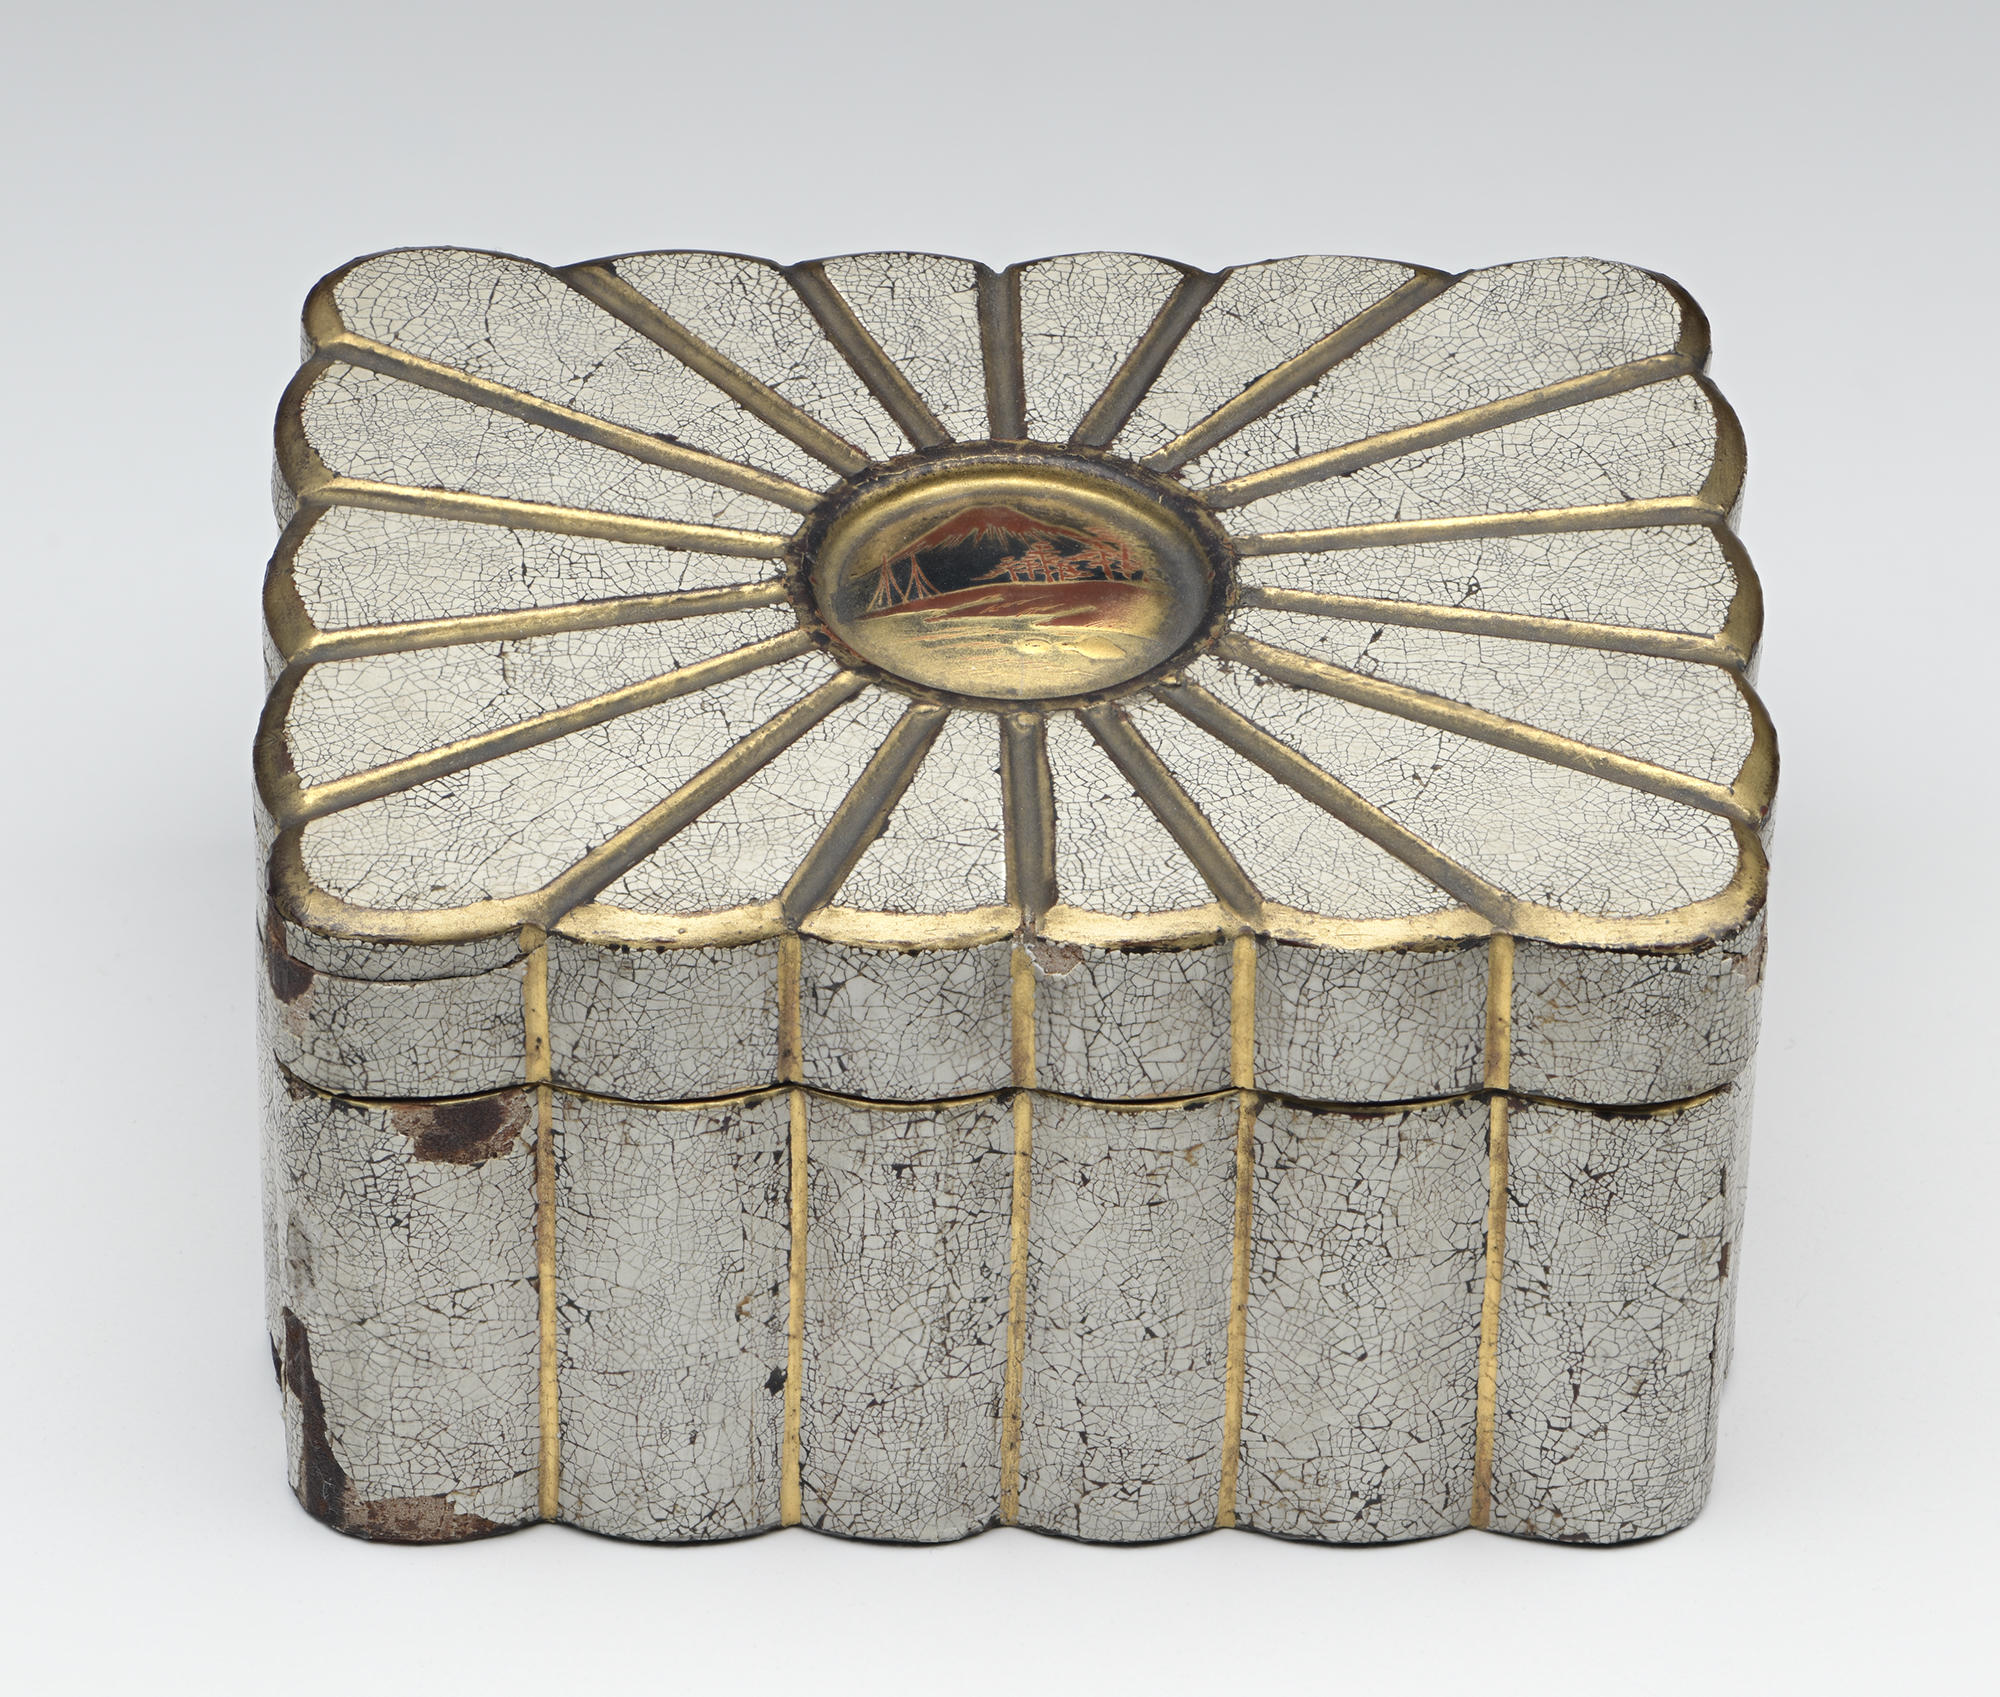 Japanese, Cigarette Box, late 19th century. Lacquer with quail eggshells and gold